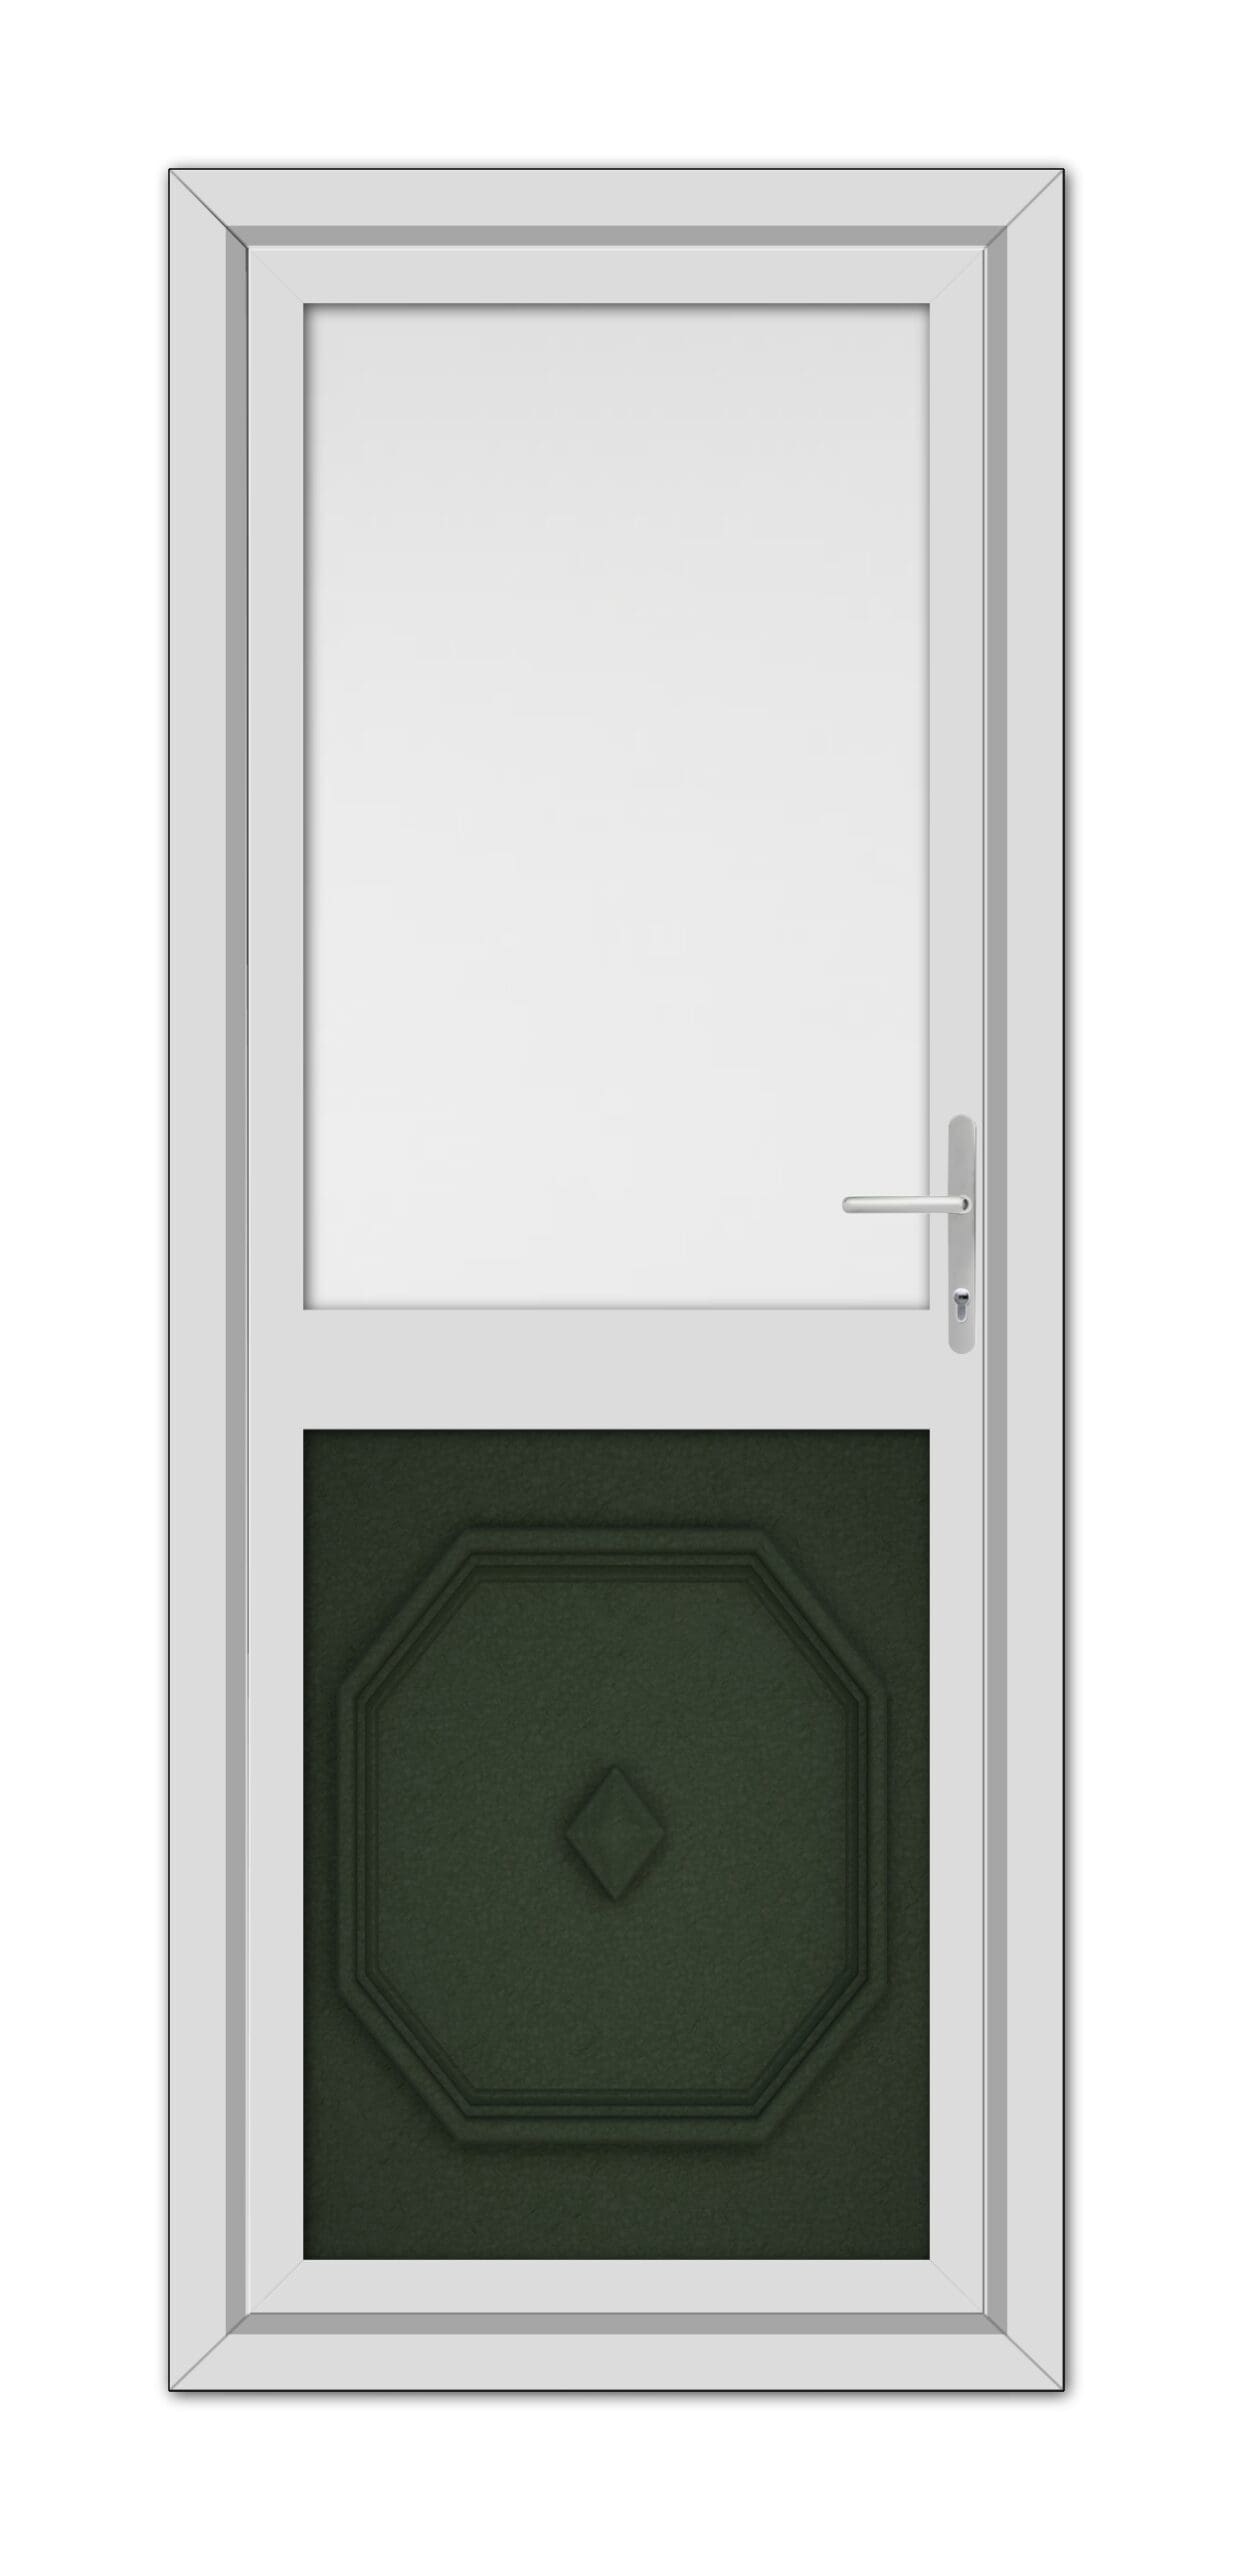 A modern grey door with a window at the top and an octagonal Green Westminster Half uPVC Back Door design on the lower panel, complete with a silver handle.